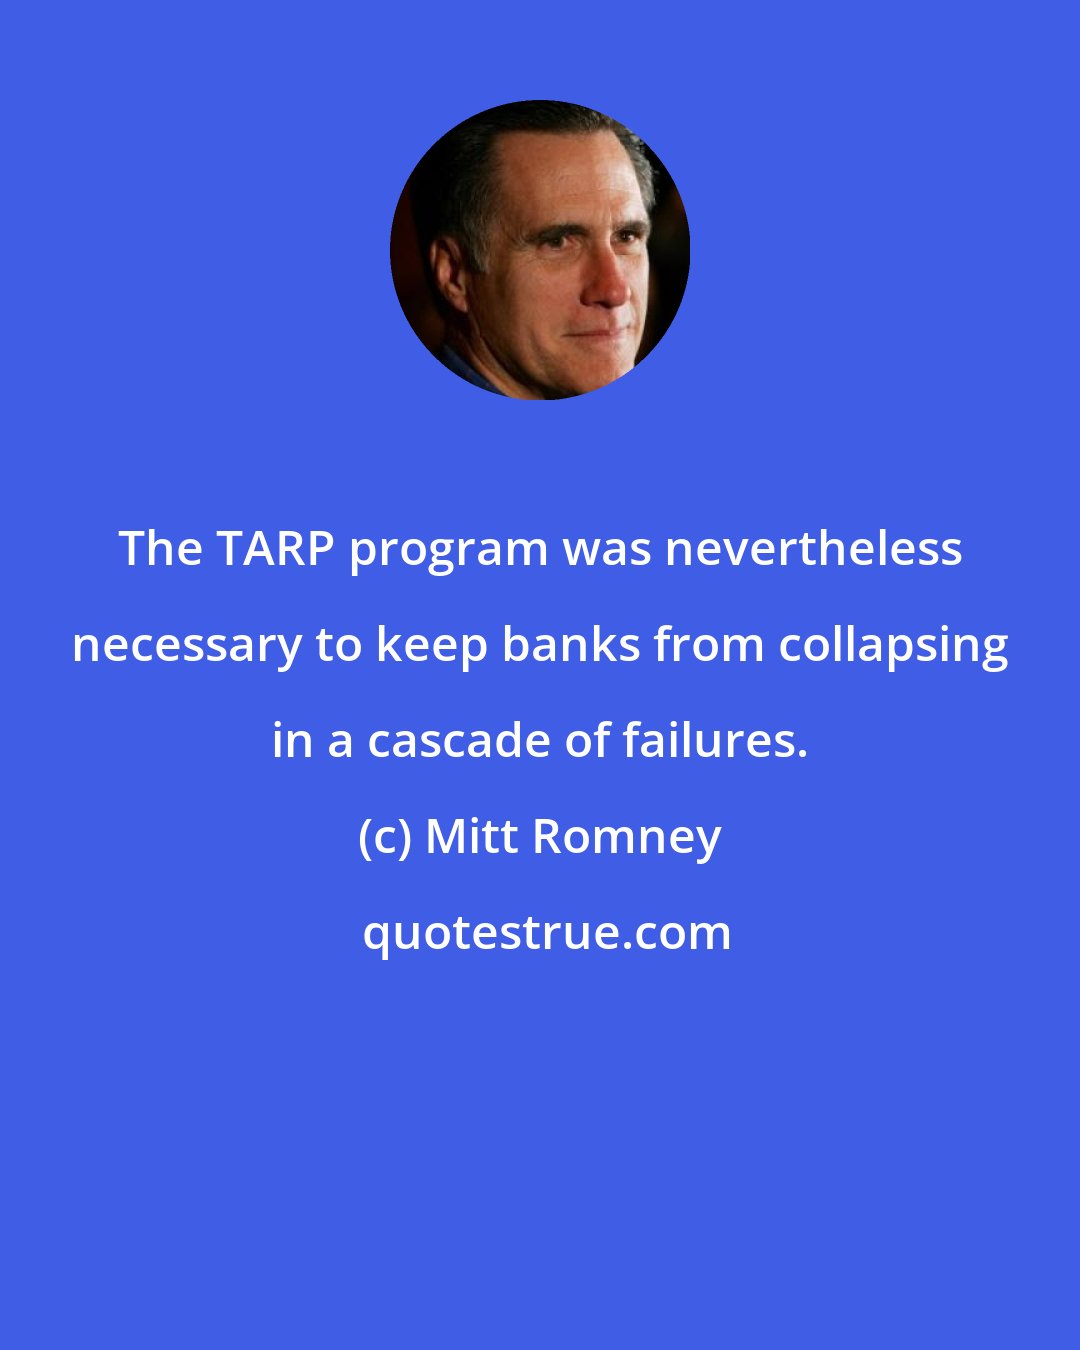 Mitt Romney: The TARP program was nevertheless necessary to keep banks from collapsing in a cascade of failures.